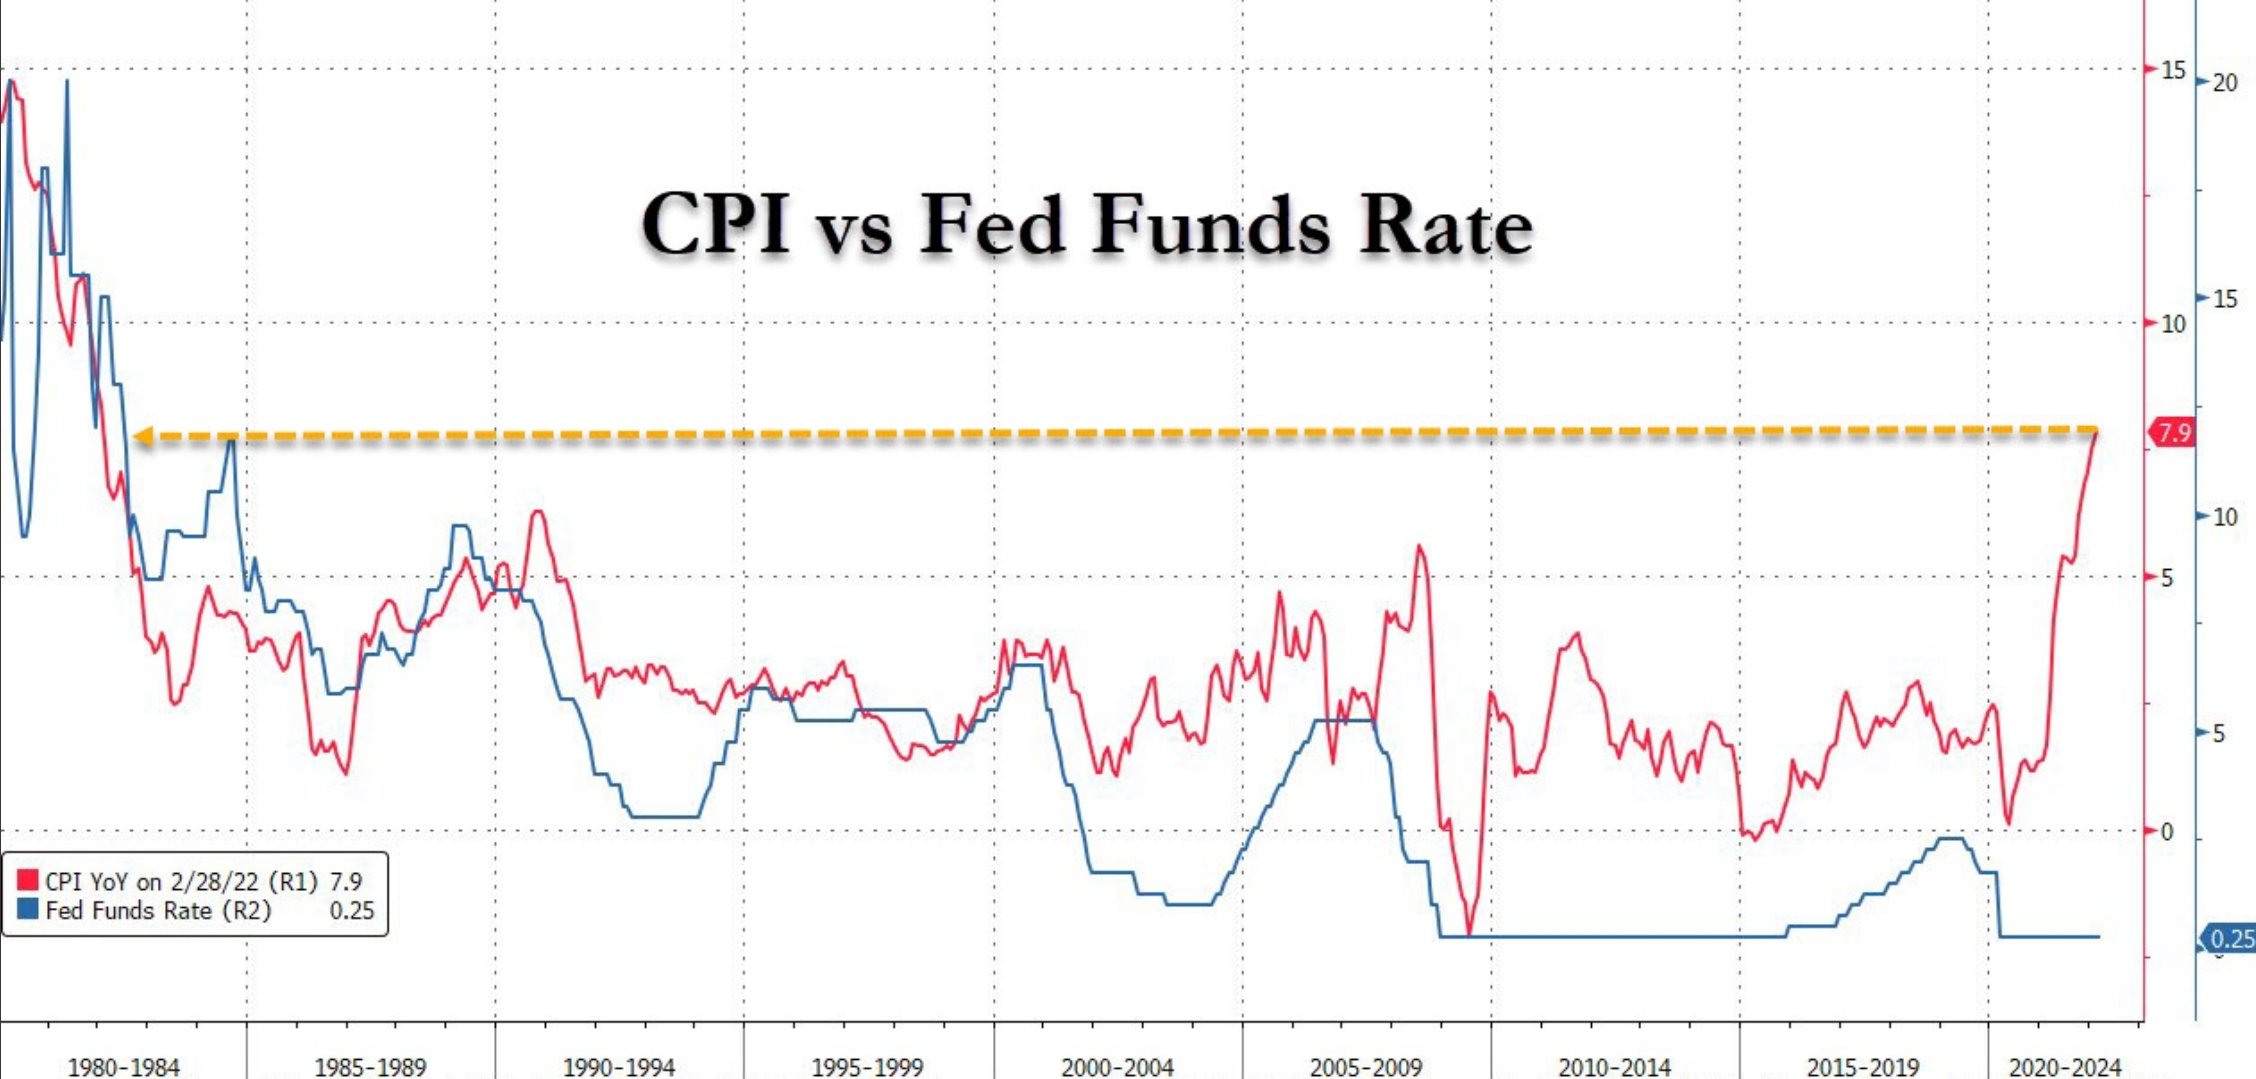 CPI vs FED FUNDS RATE